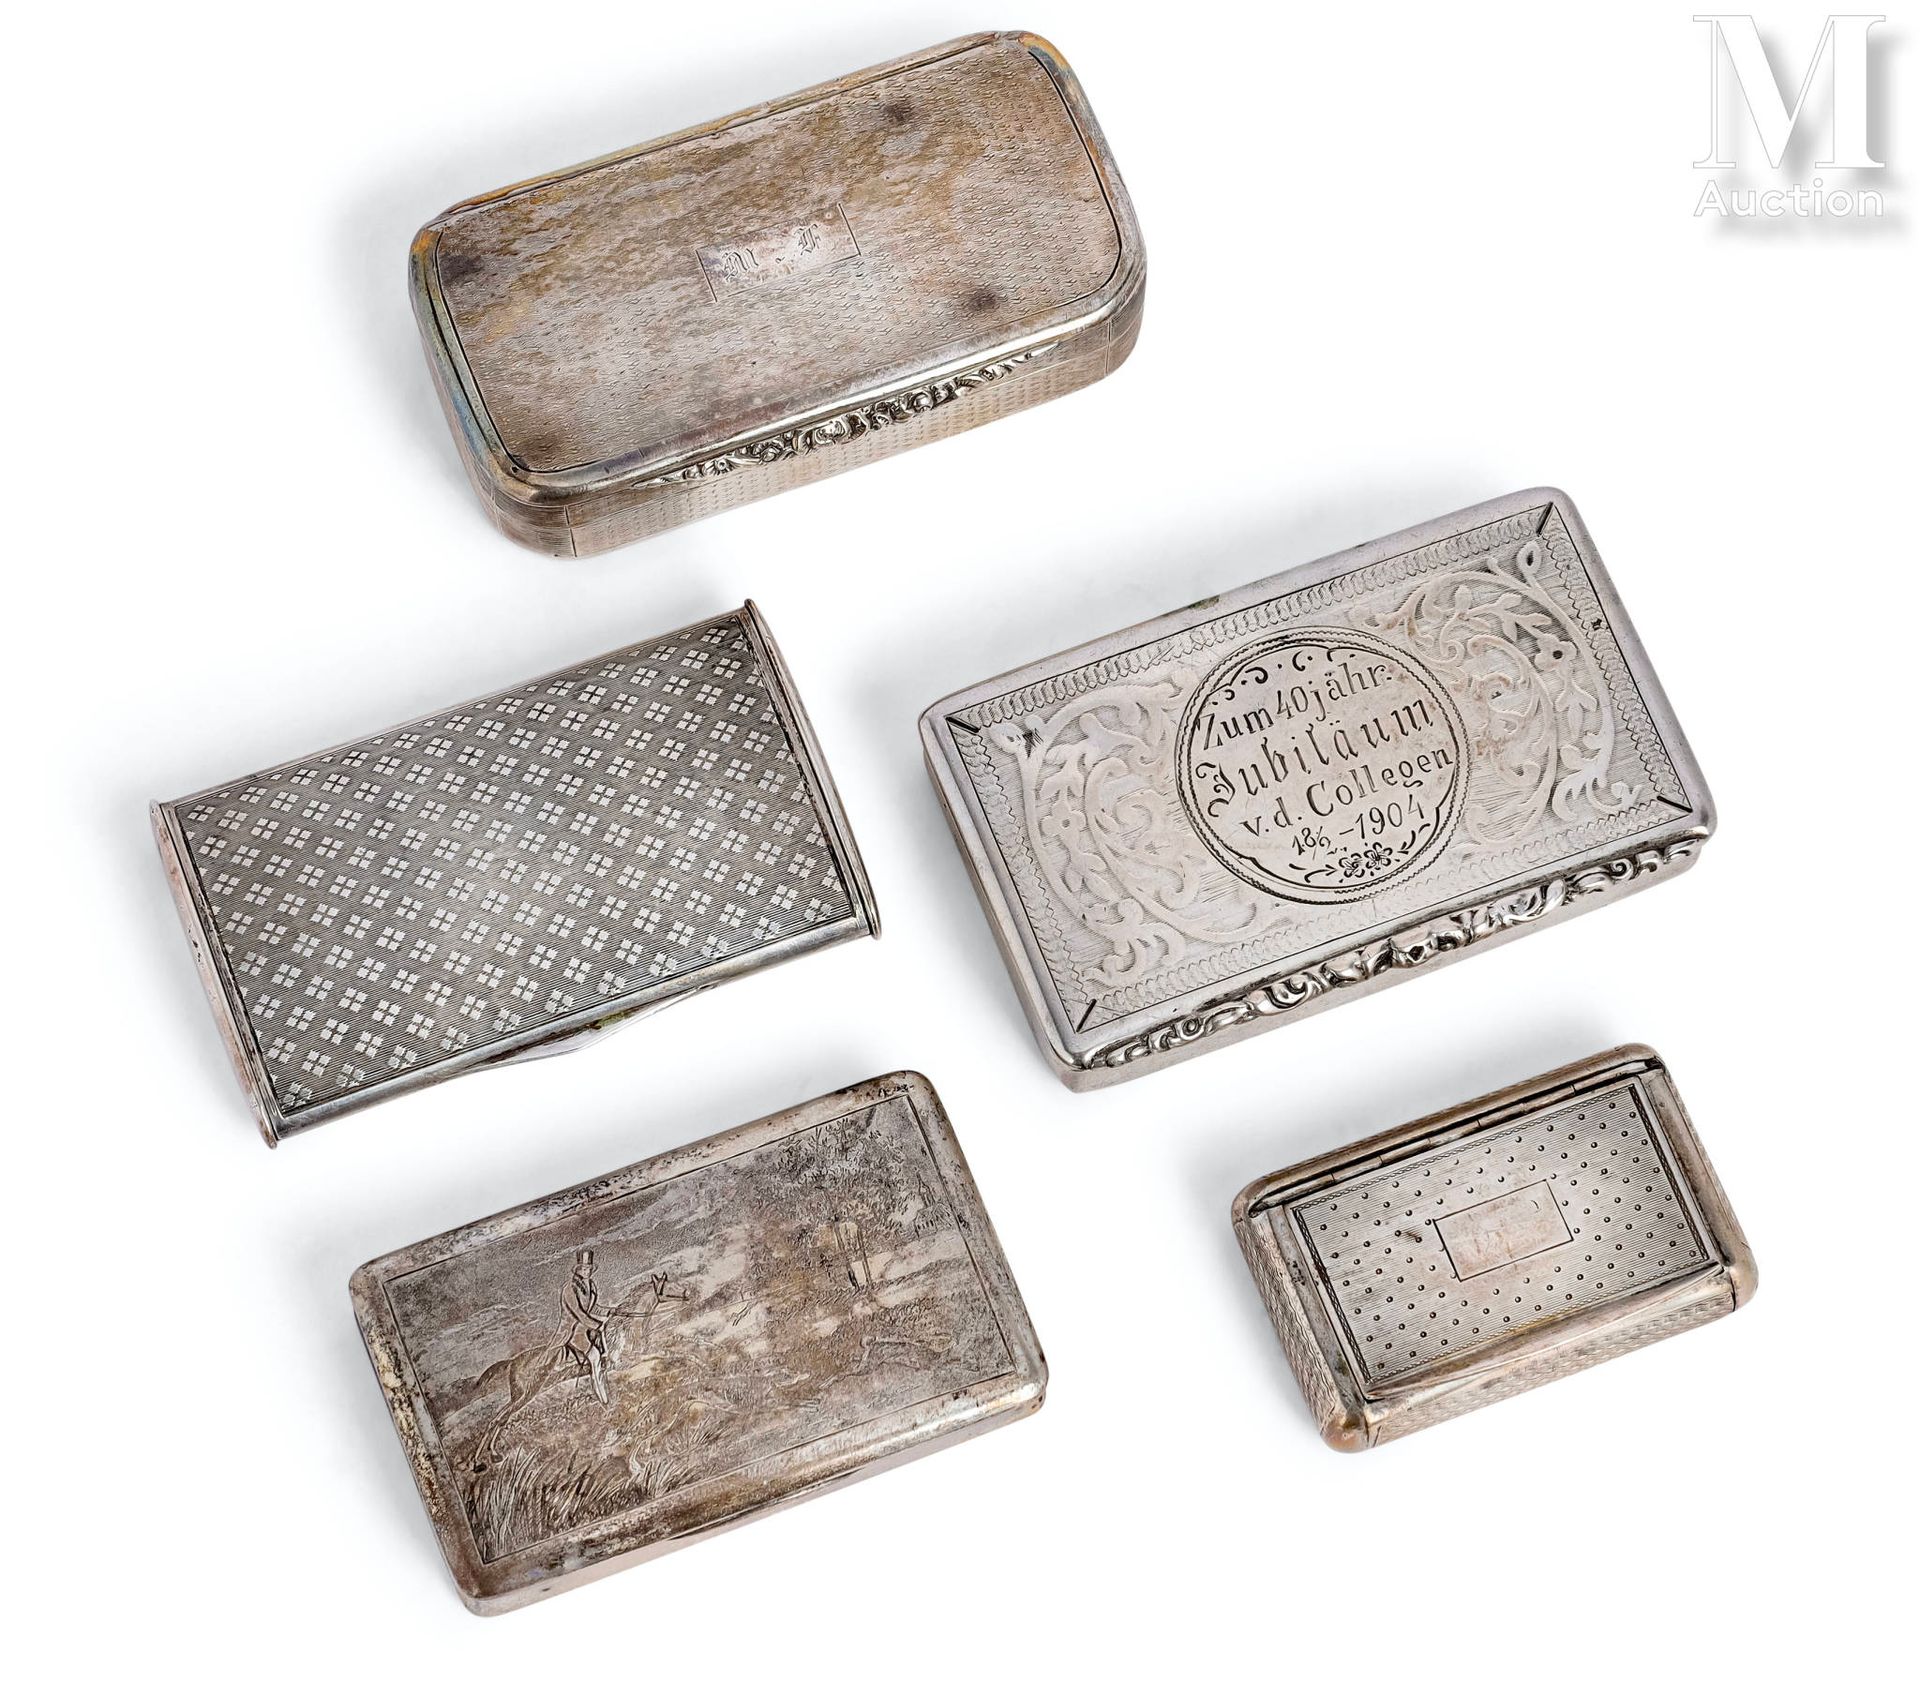 Tabatières in silver
including 5 silver snuffboxes or snuff boxes, chased, engin&hellip;